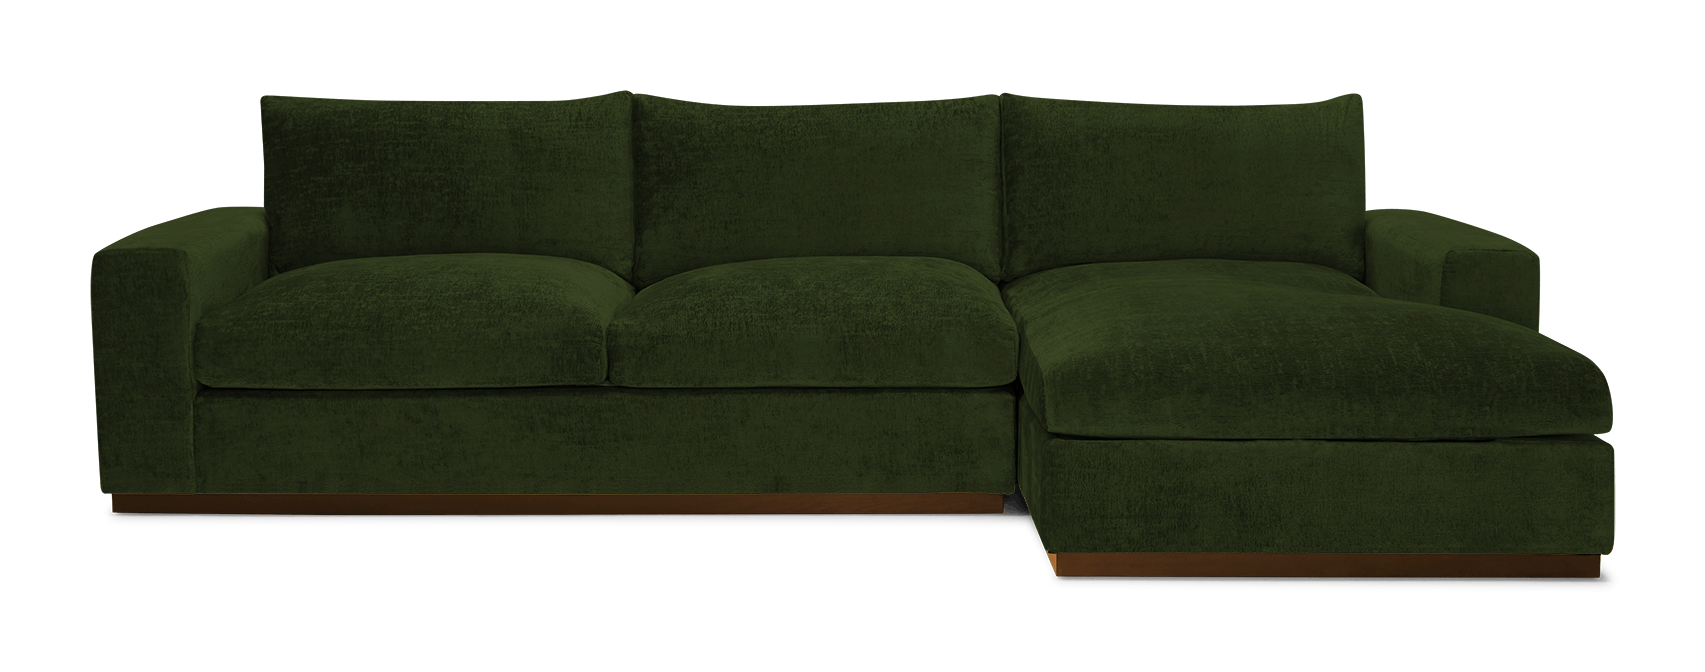 holt sectional with storage royale forest